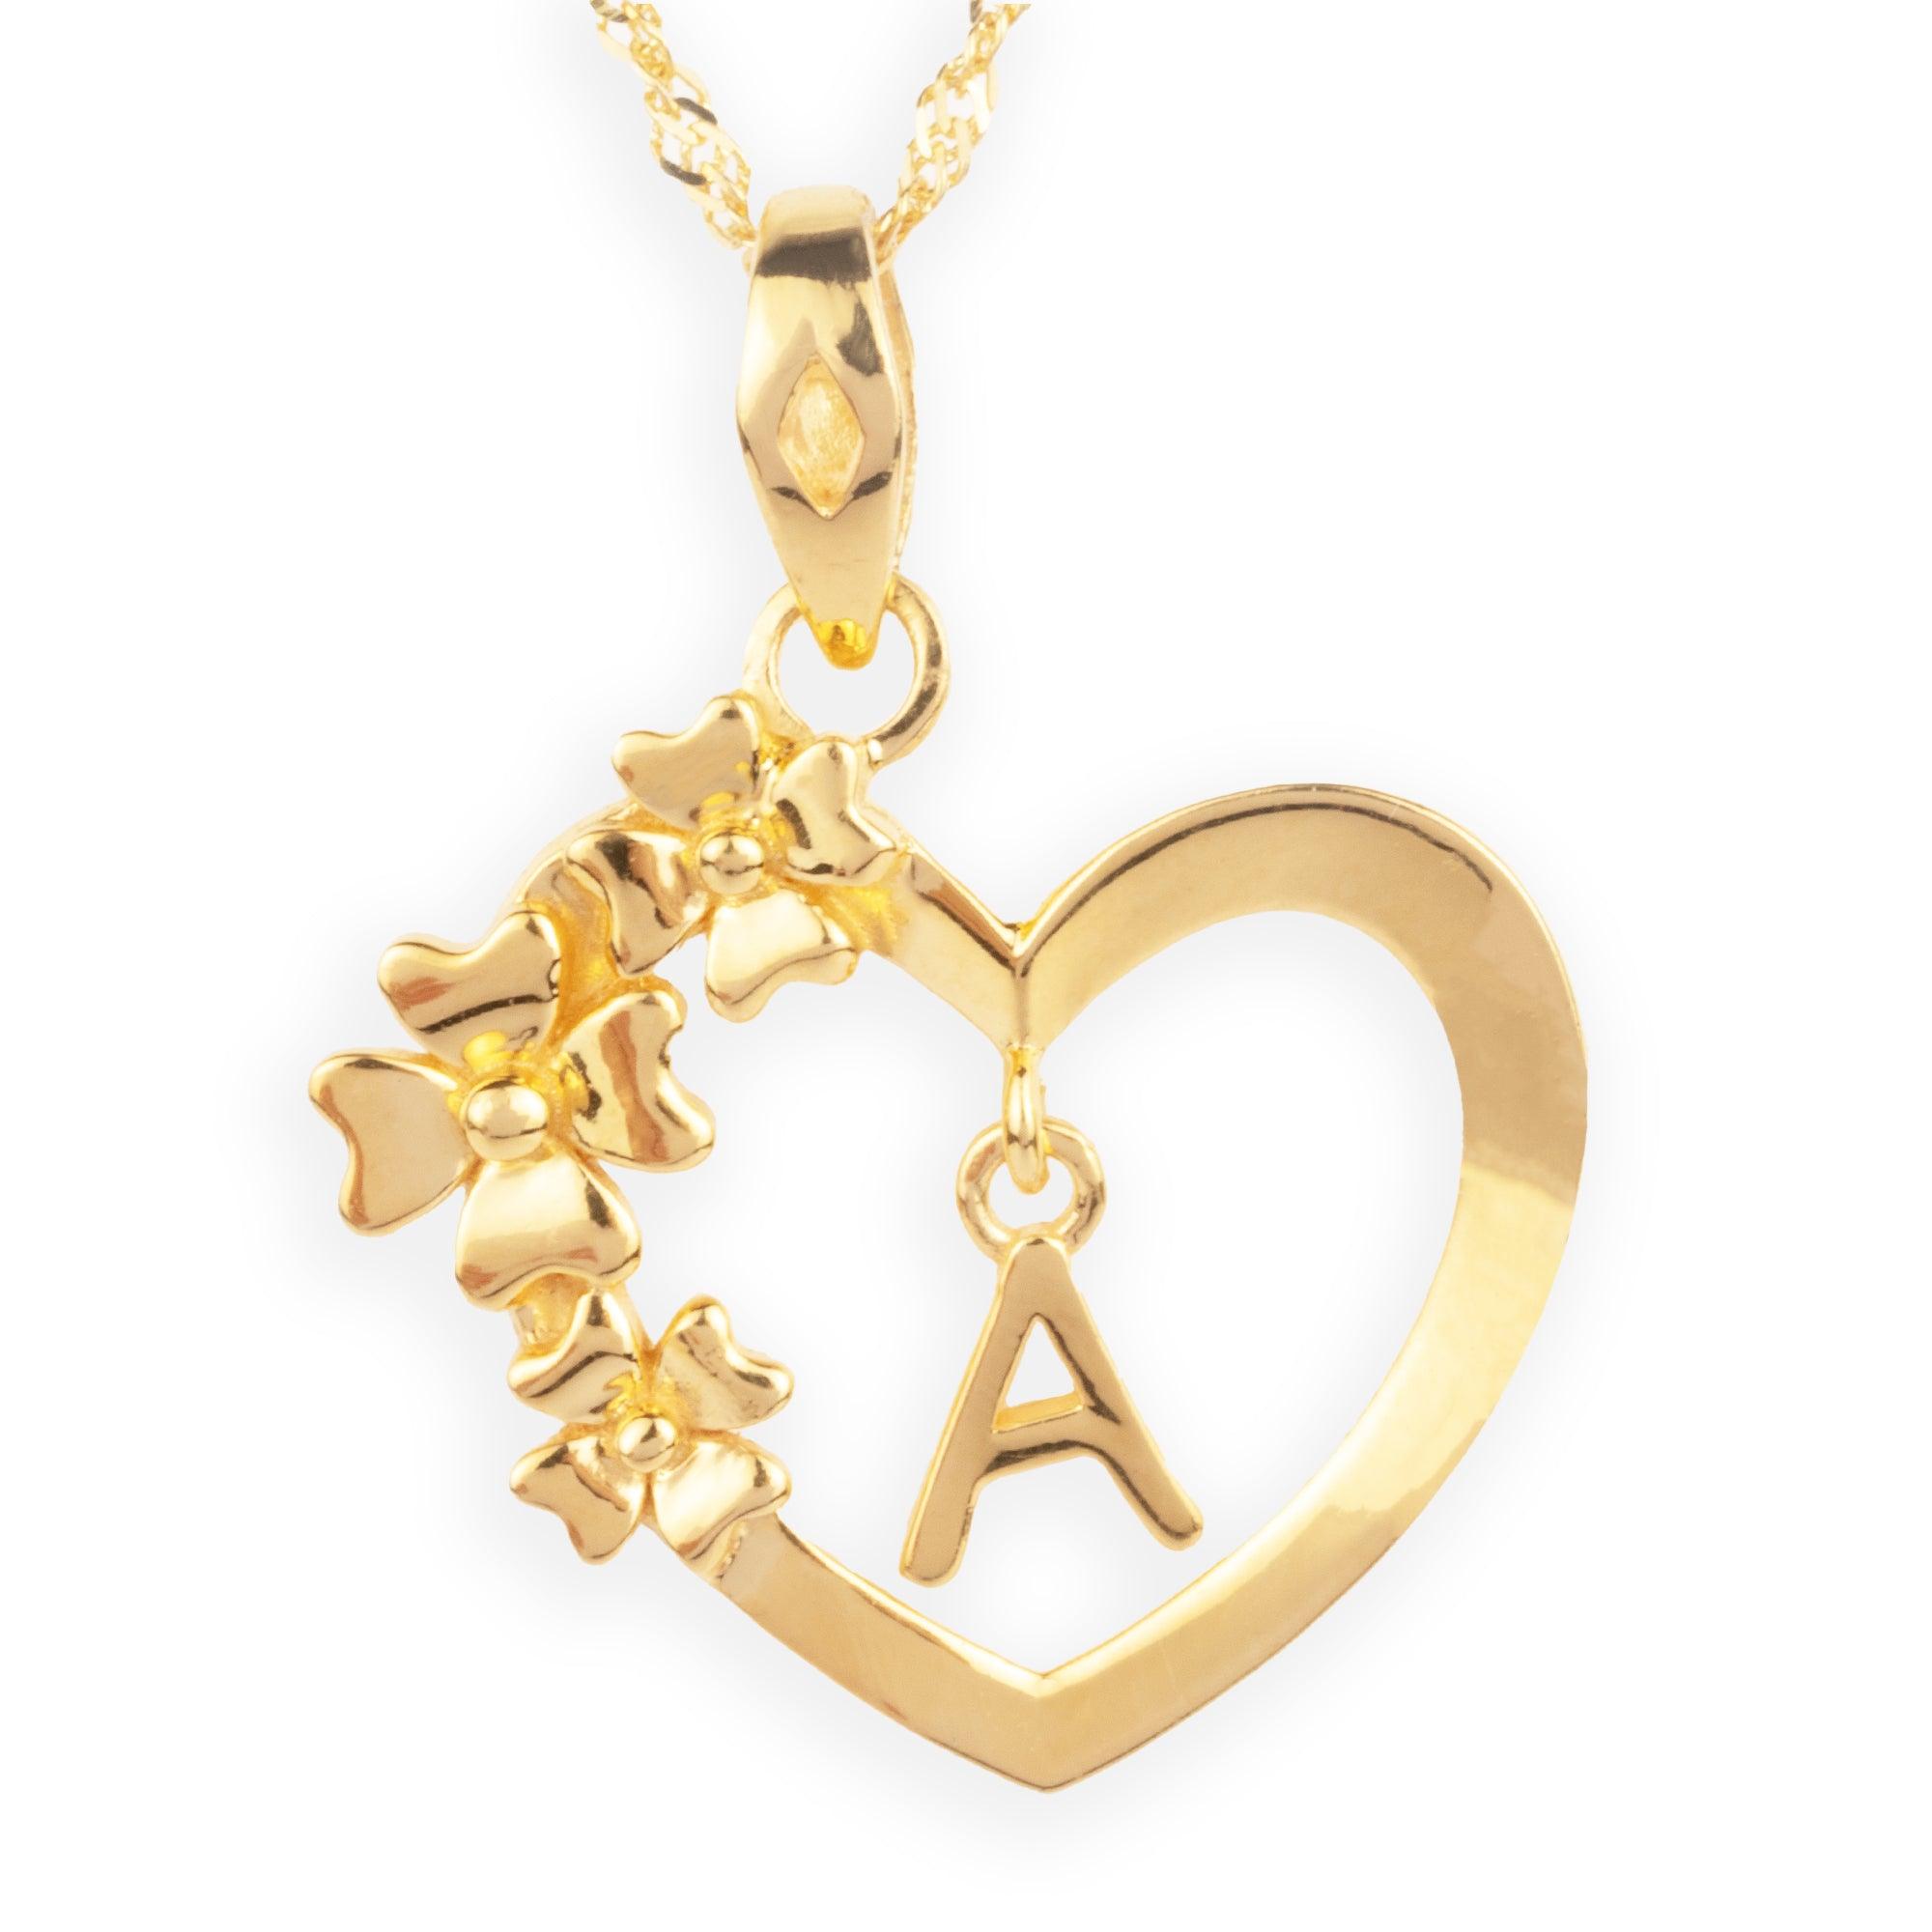 'A' 22ct Gold Heart Shape Initial with Flower Design Pendant P-7035